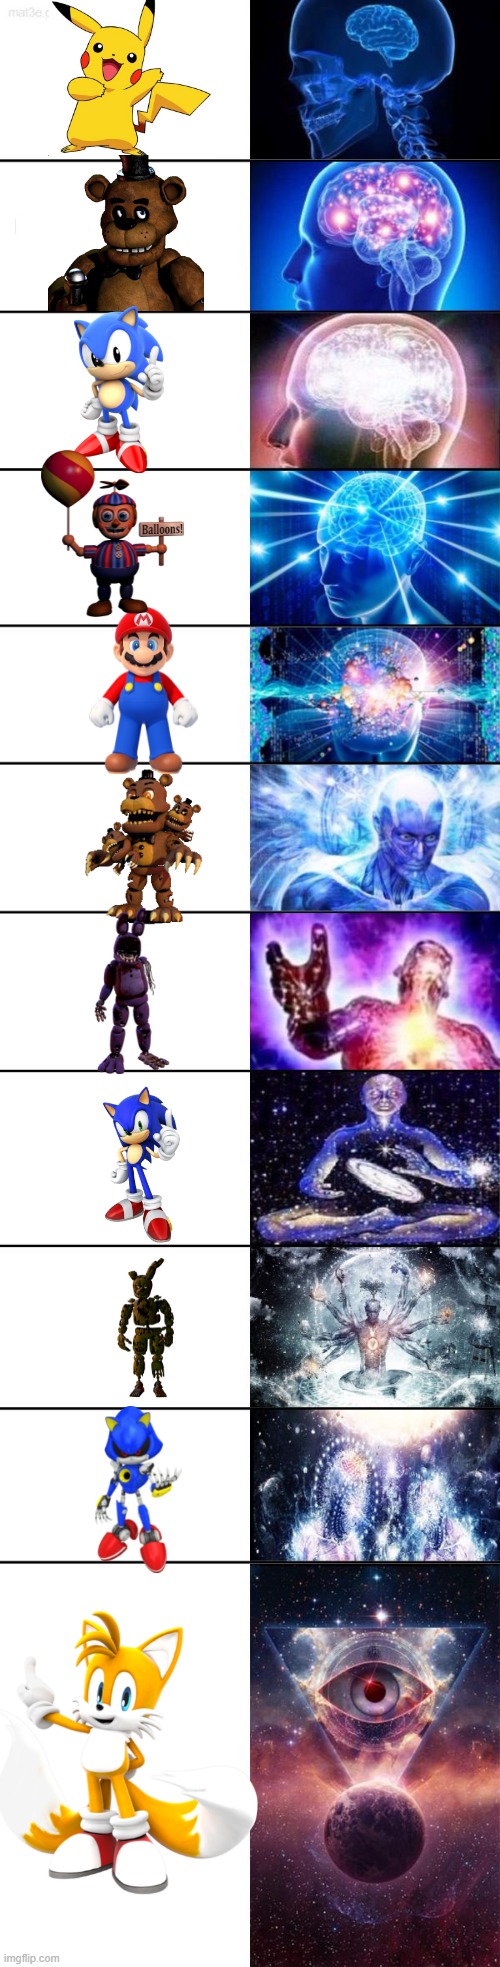 all of my favorite character the most is T A I L S T H E F O X ( R E M A K E) | image tagged in extended expanding brain,tails,pikachu,fnaf,fnaf 4,sonic the hedgehog | made w/ Imgflip meme maker